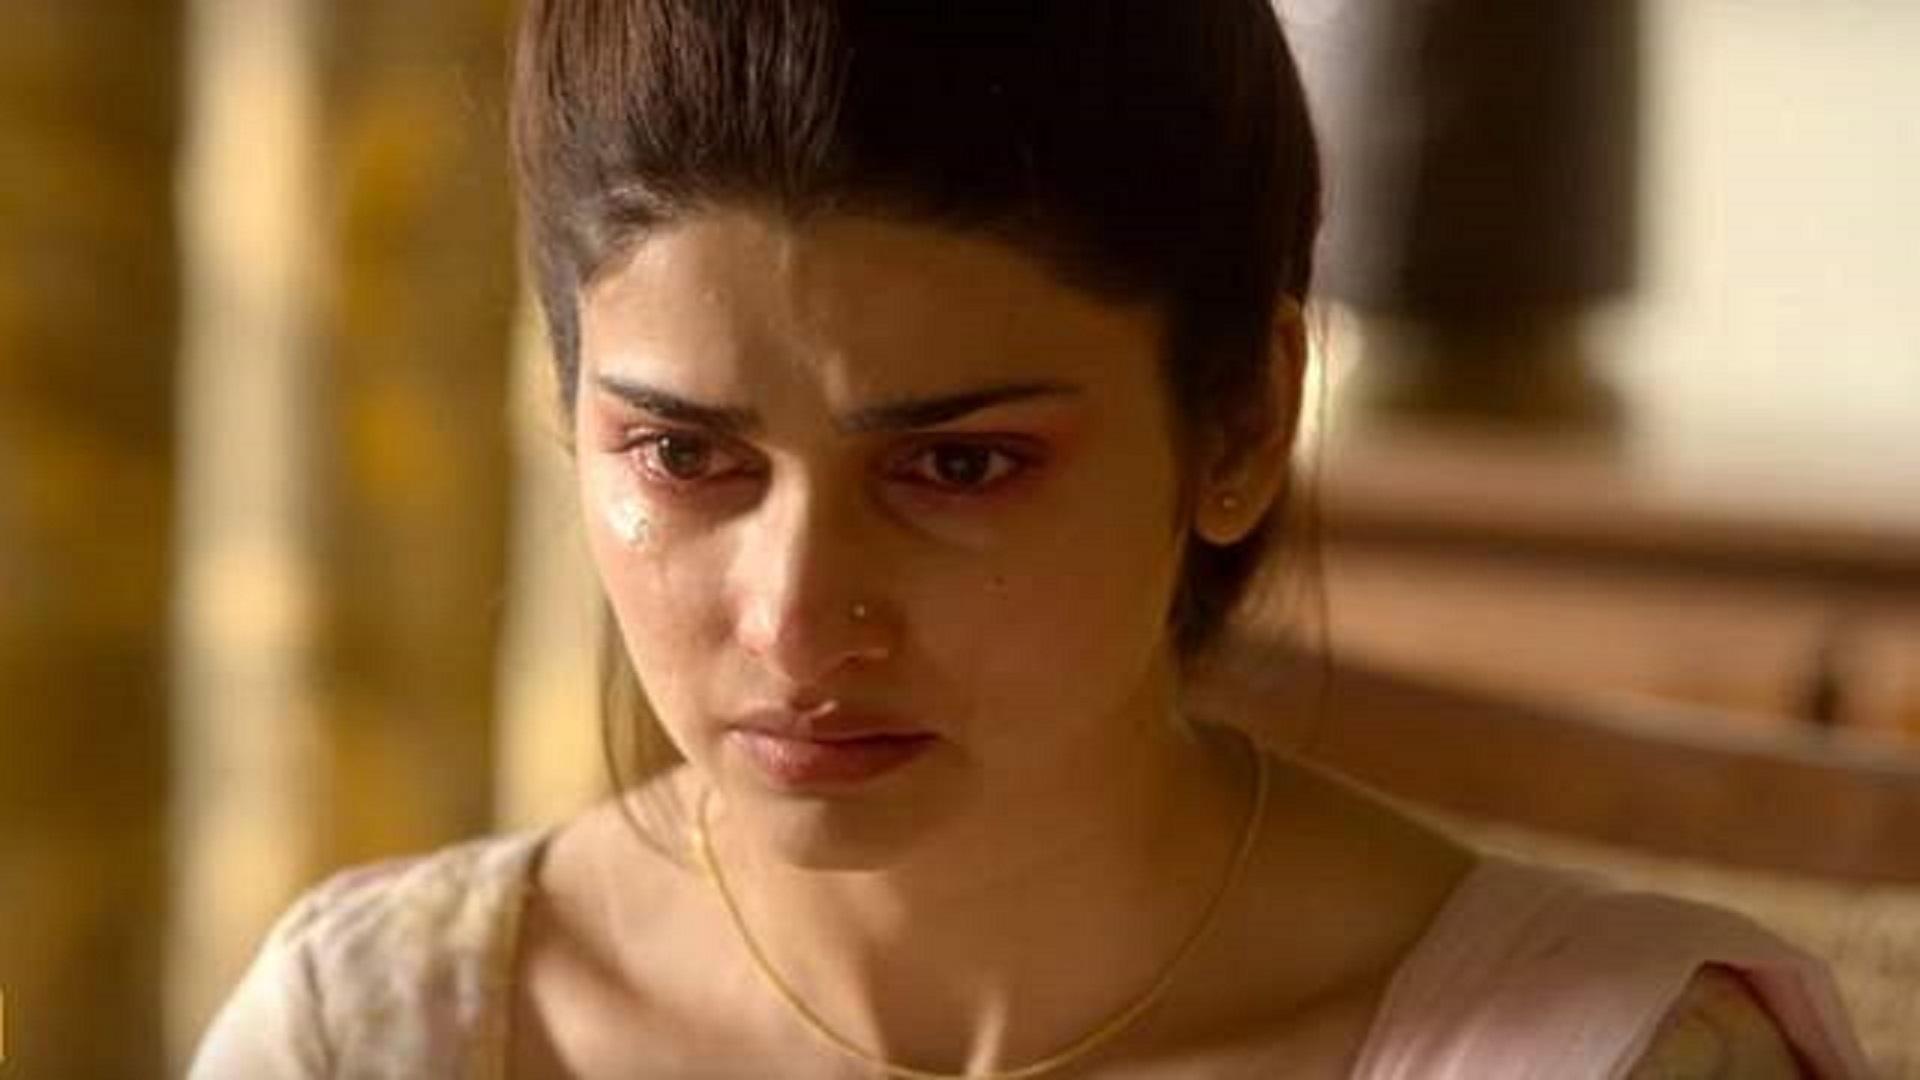 Prachi Desai on Nepotism: “Bollywood is about playing within the film families”